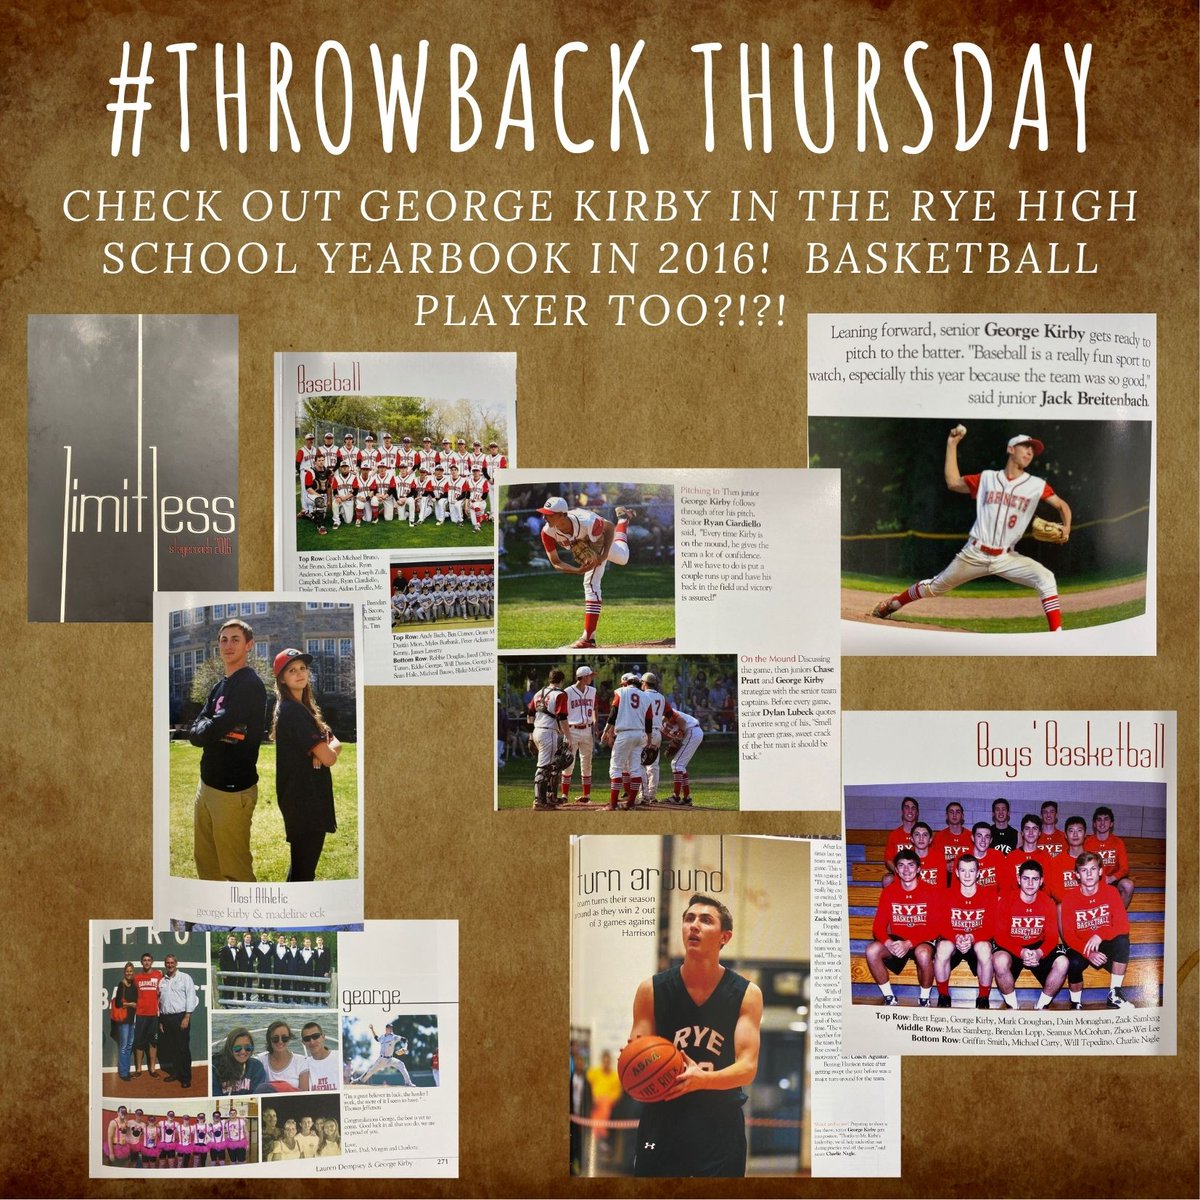 The RCSD is known for many amazing things, including our stellar sports teams. One of the current athletic alumni stars is Seattle Mariners pitcher George Kirby. Check out his time in Rye here! ⚾️🔴⚫️ #TBT #RyeCommitment